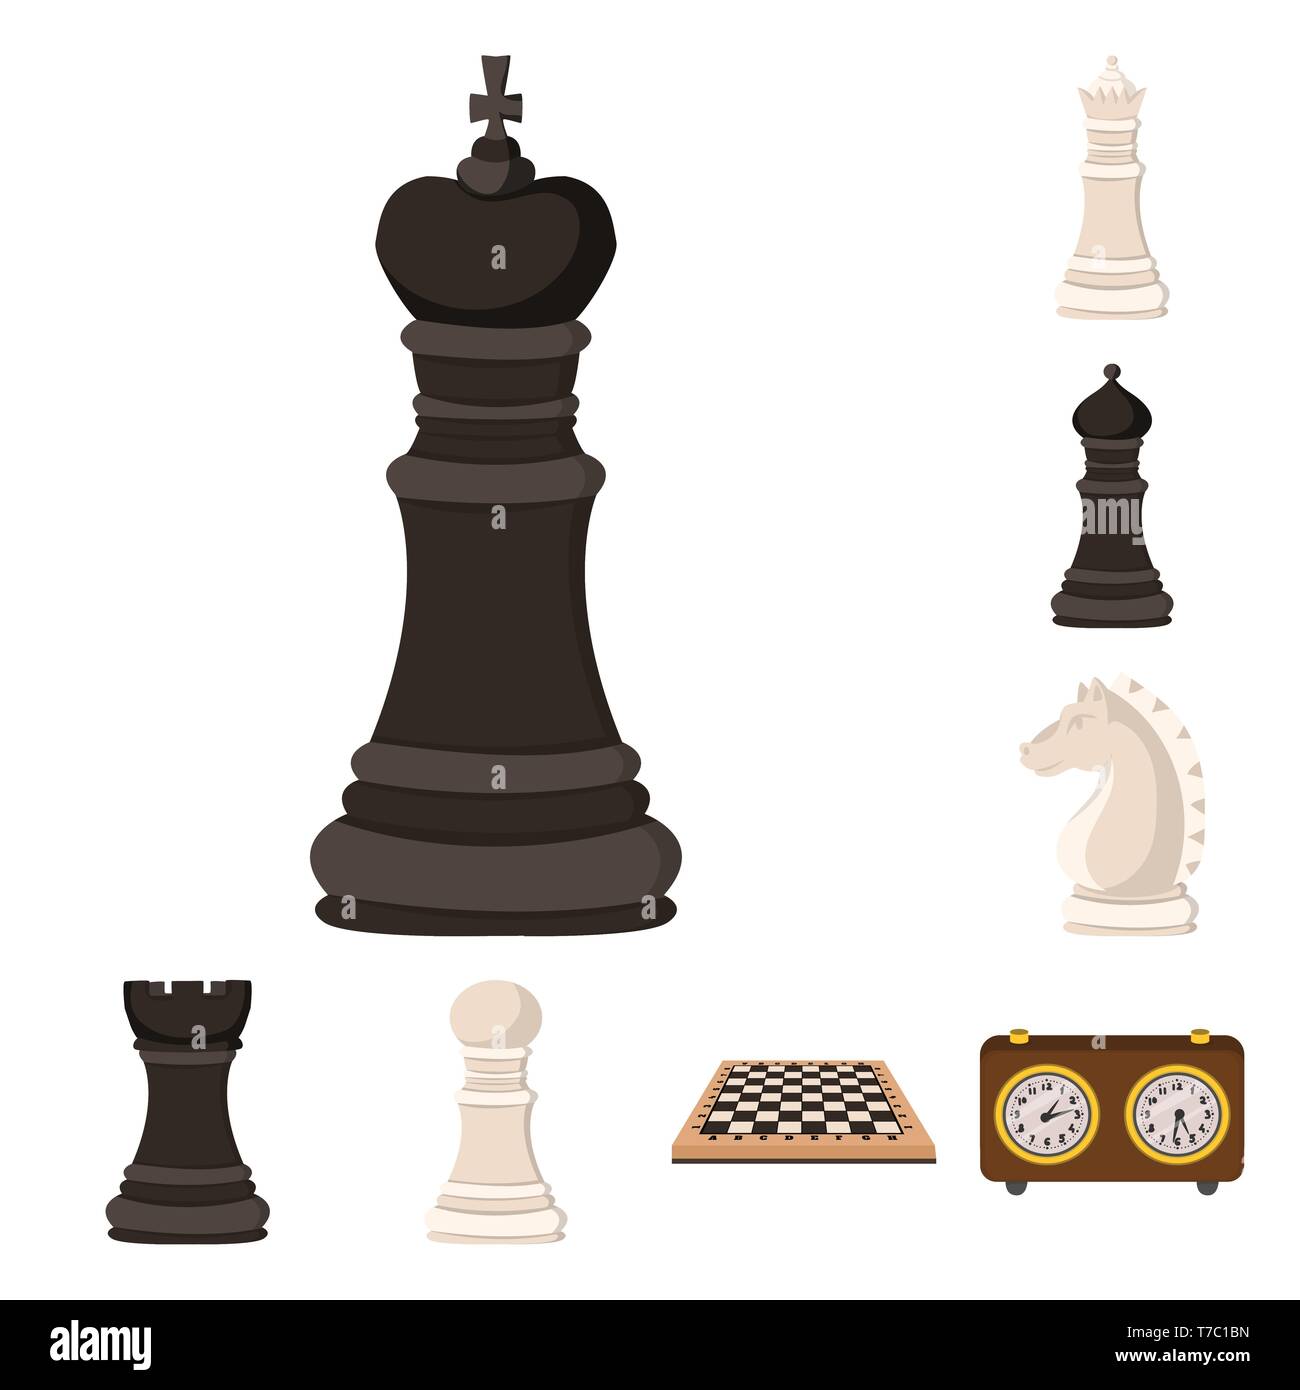 king,queen,bishop,knight,rook,pawn,chessboard,clock,board,strategic,horse,black,timer,white,championship,castle,checkerboard,speed,business,mate,tower,figure,empty,leadership,check,head,network,counter,chess,game,piece,strategy,tactical,play,checkmate,thin,club,target,set,vector,icon,illustration,isolated,collection,design,element,graphic,sign,cartoon,color Vector Vectors , Stock Vector